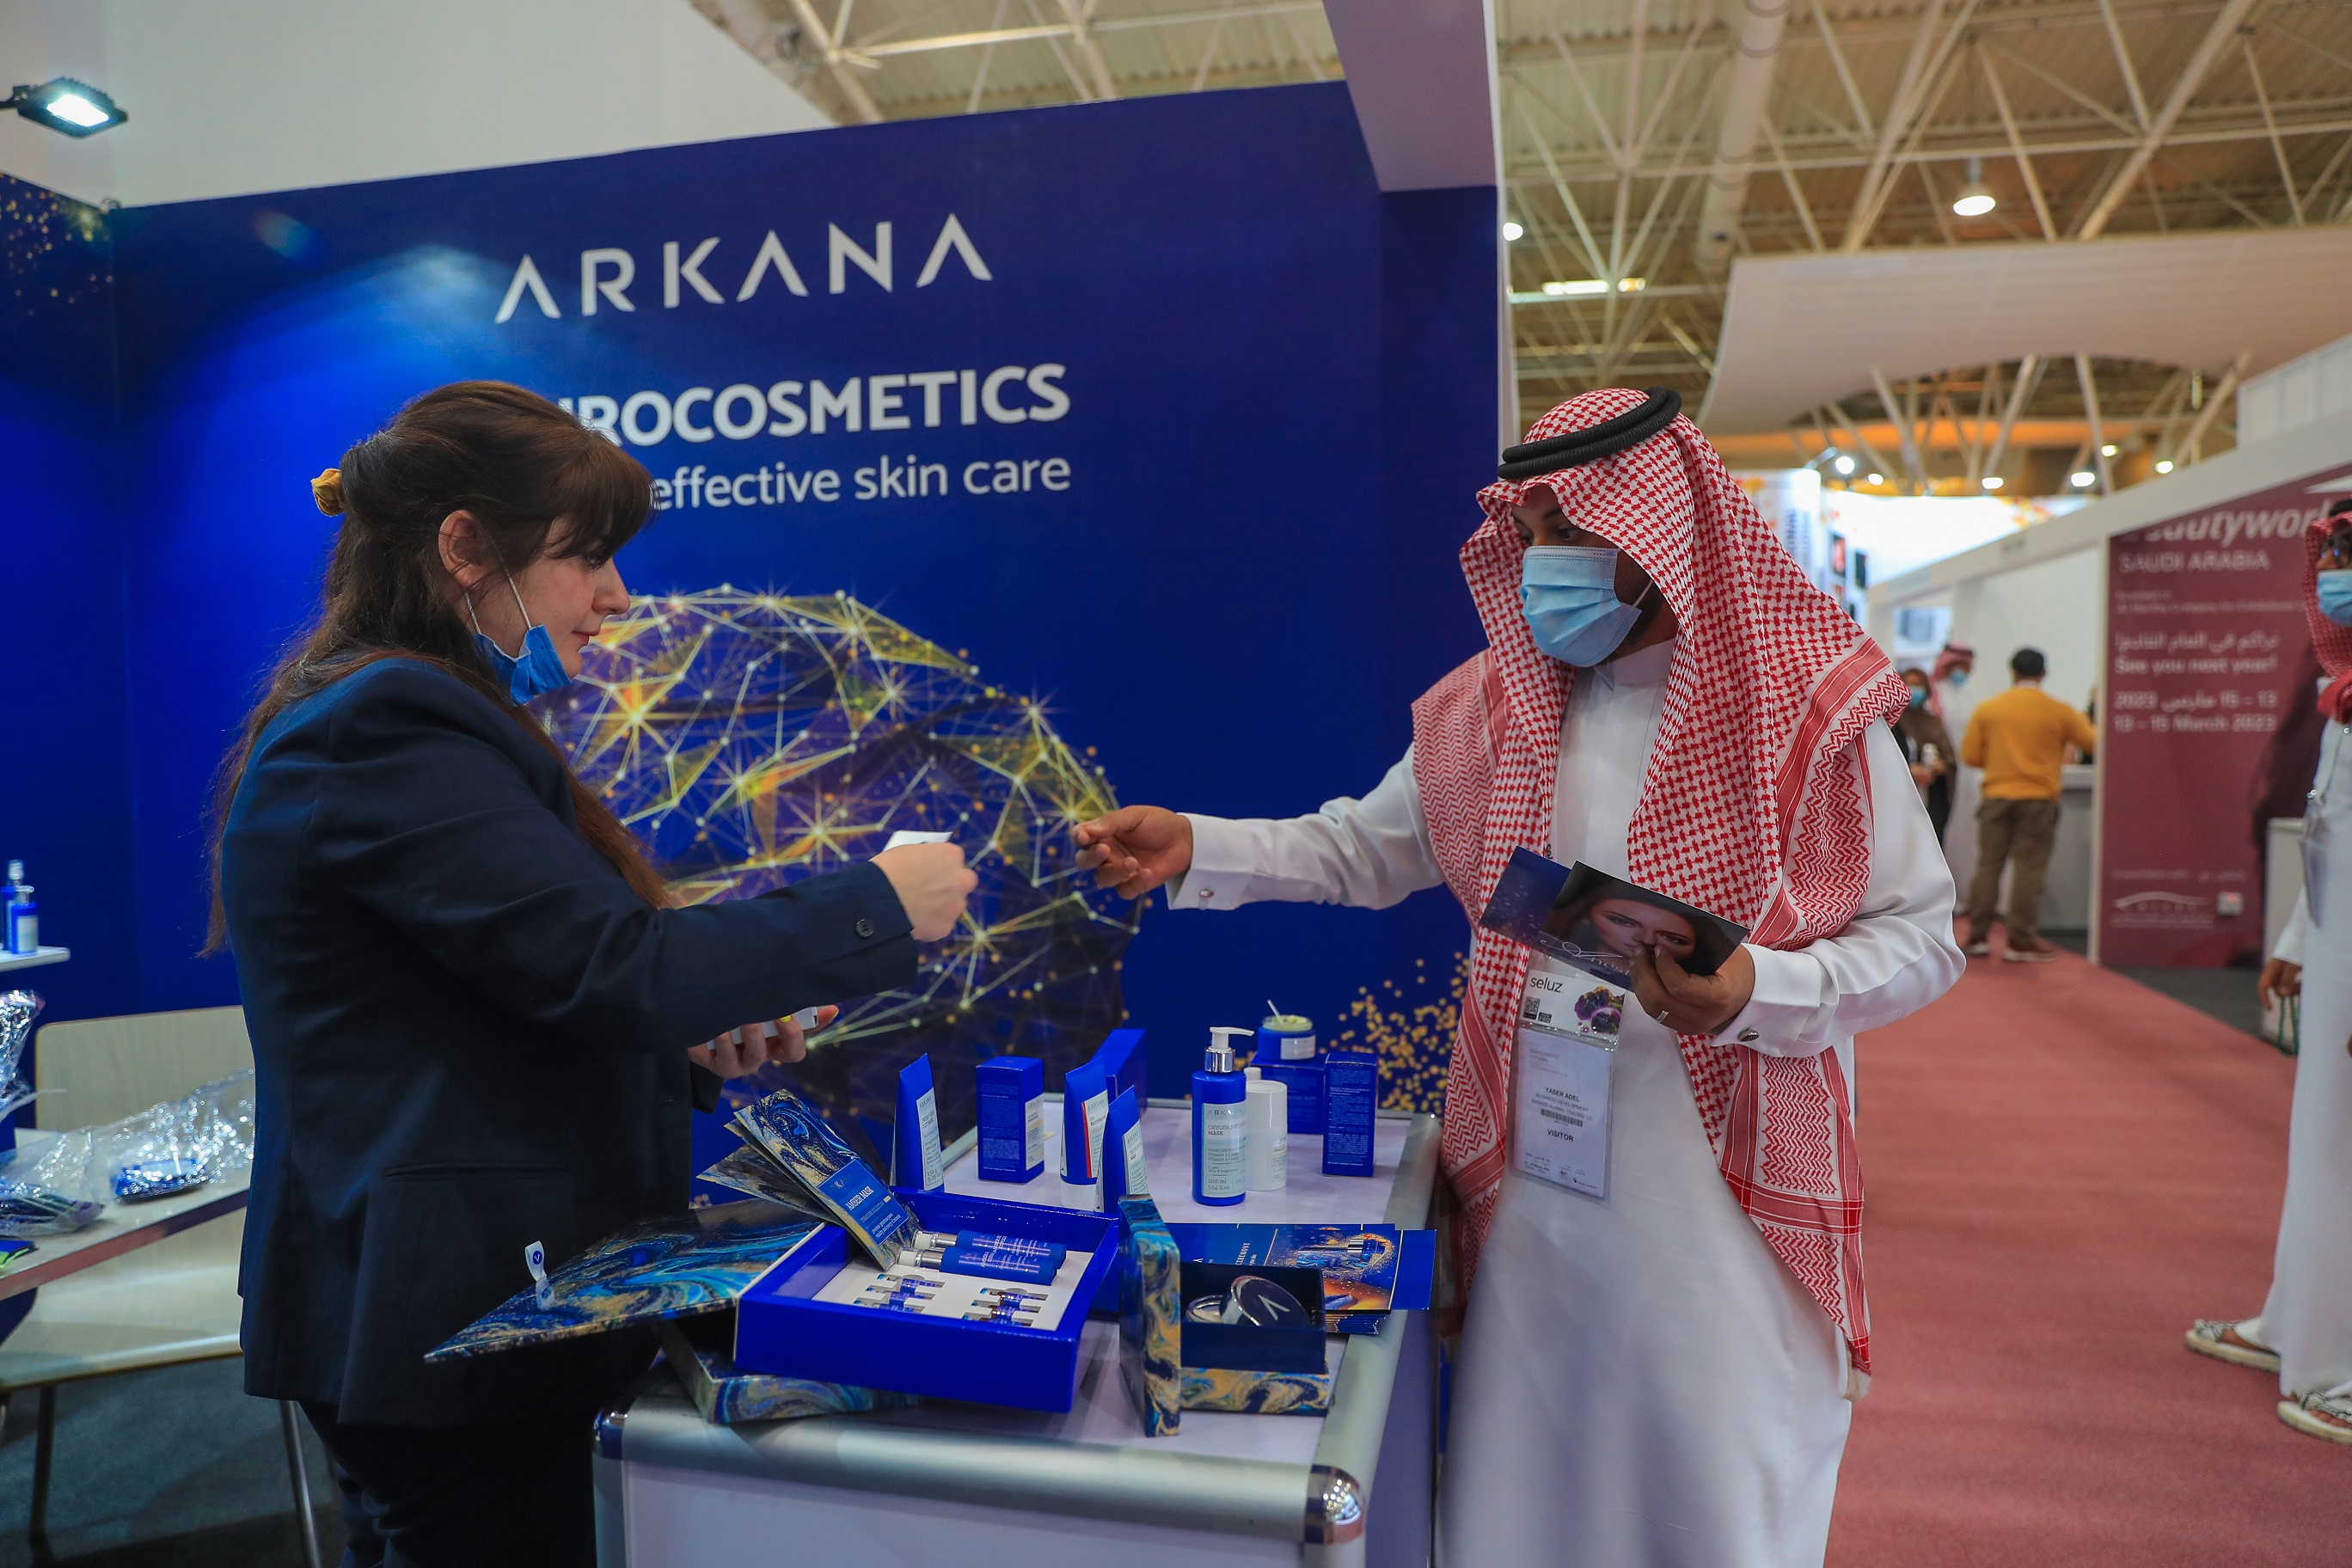 Beautyworld Saudi Arabia welcomed 4758 Saudi trade buyers through the doors at the Riyadh International Convention and Exhibition Centre